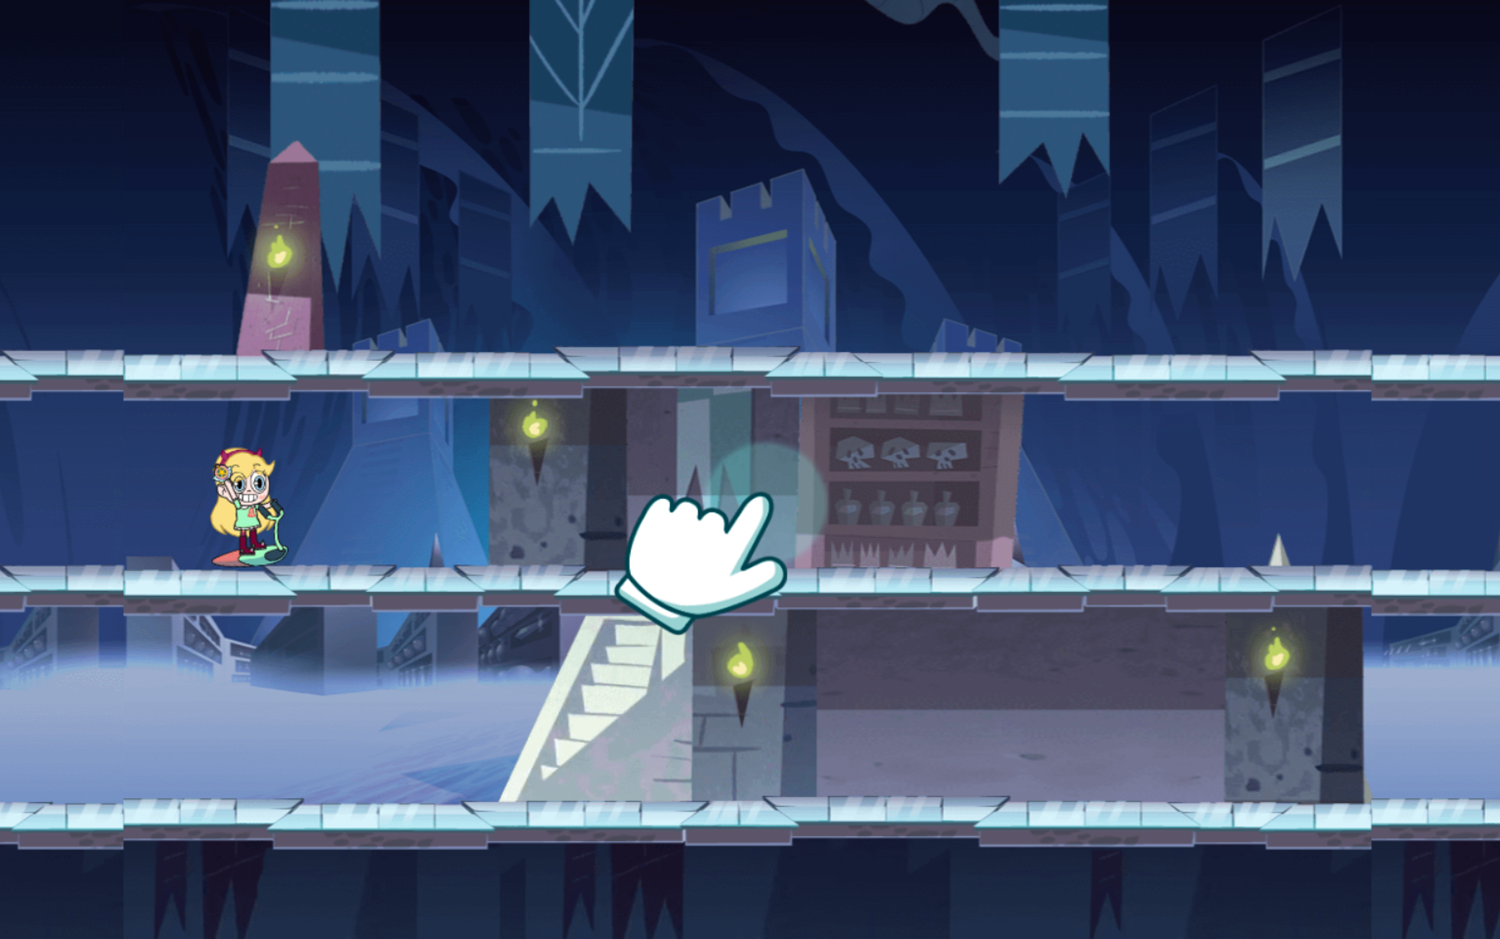 Star vs the Forces of Evil Quest Buy Rush Game Start Screenshot.